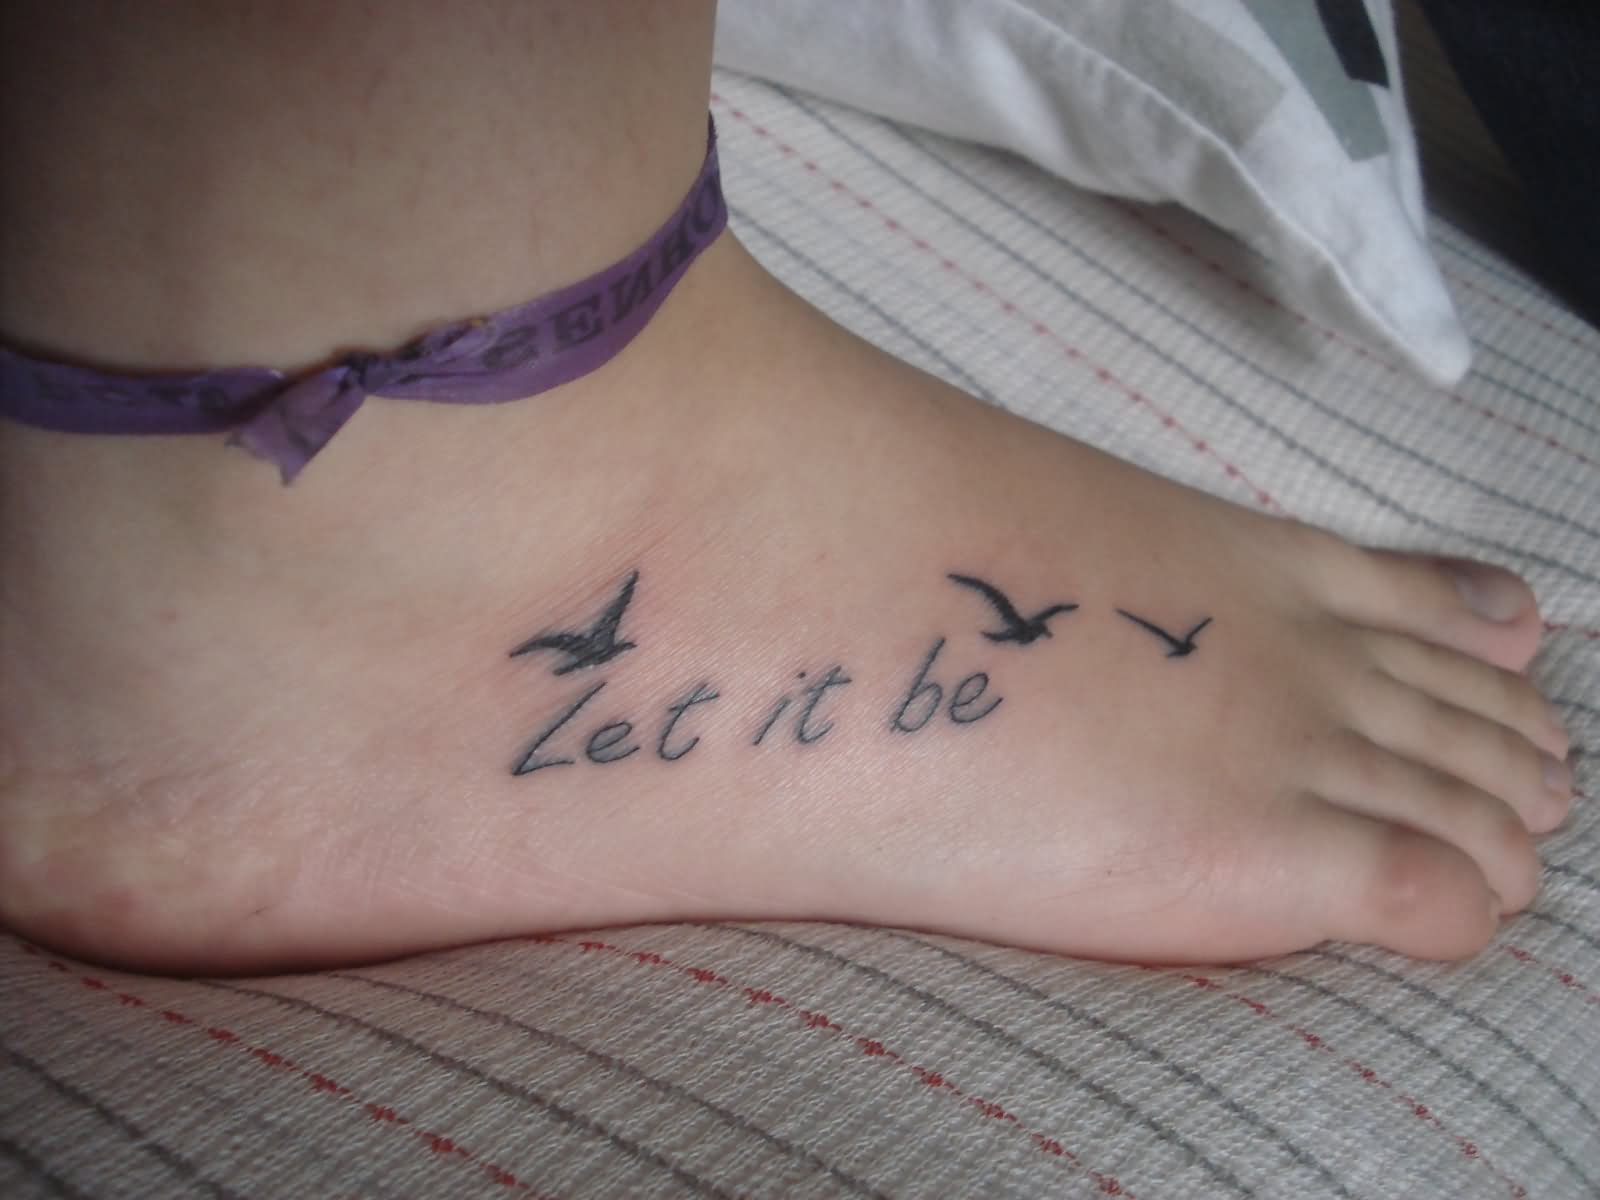 Let It Be - Black Flying Birds Tattoo On Right Foot